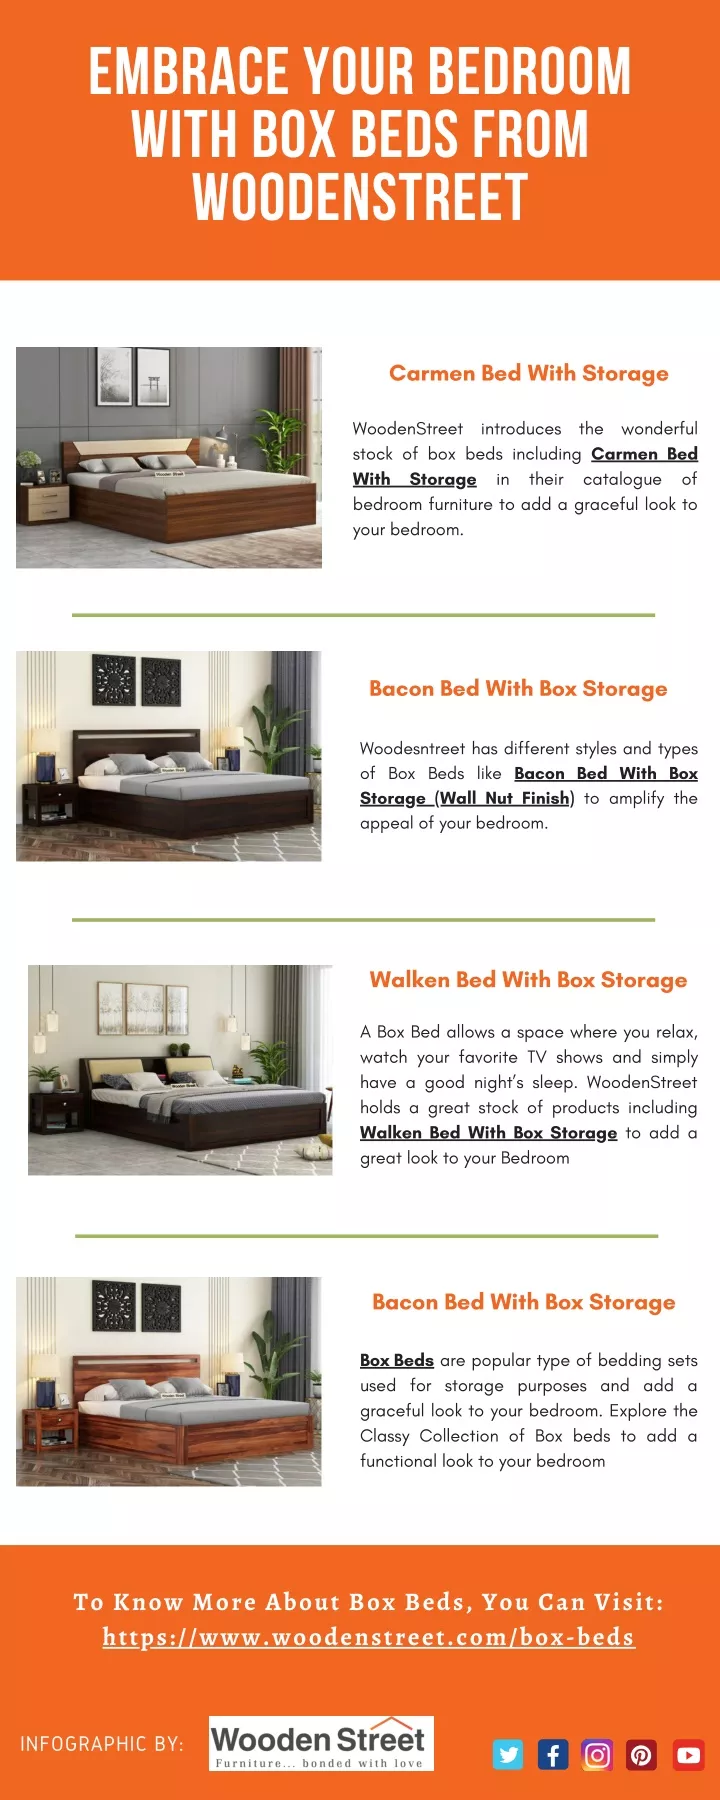 embrace your bedroom with box beds from